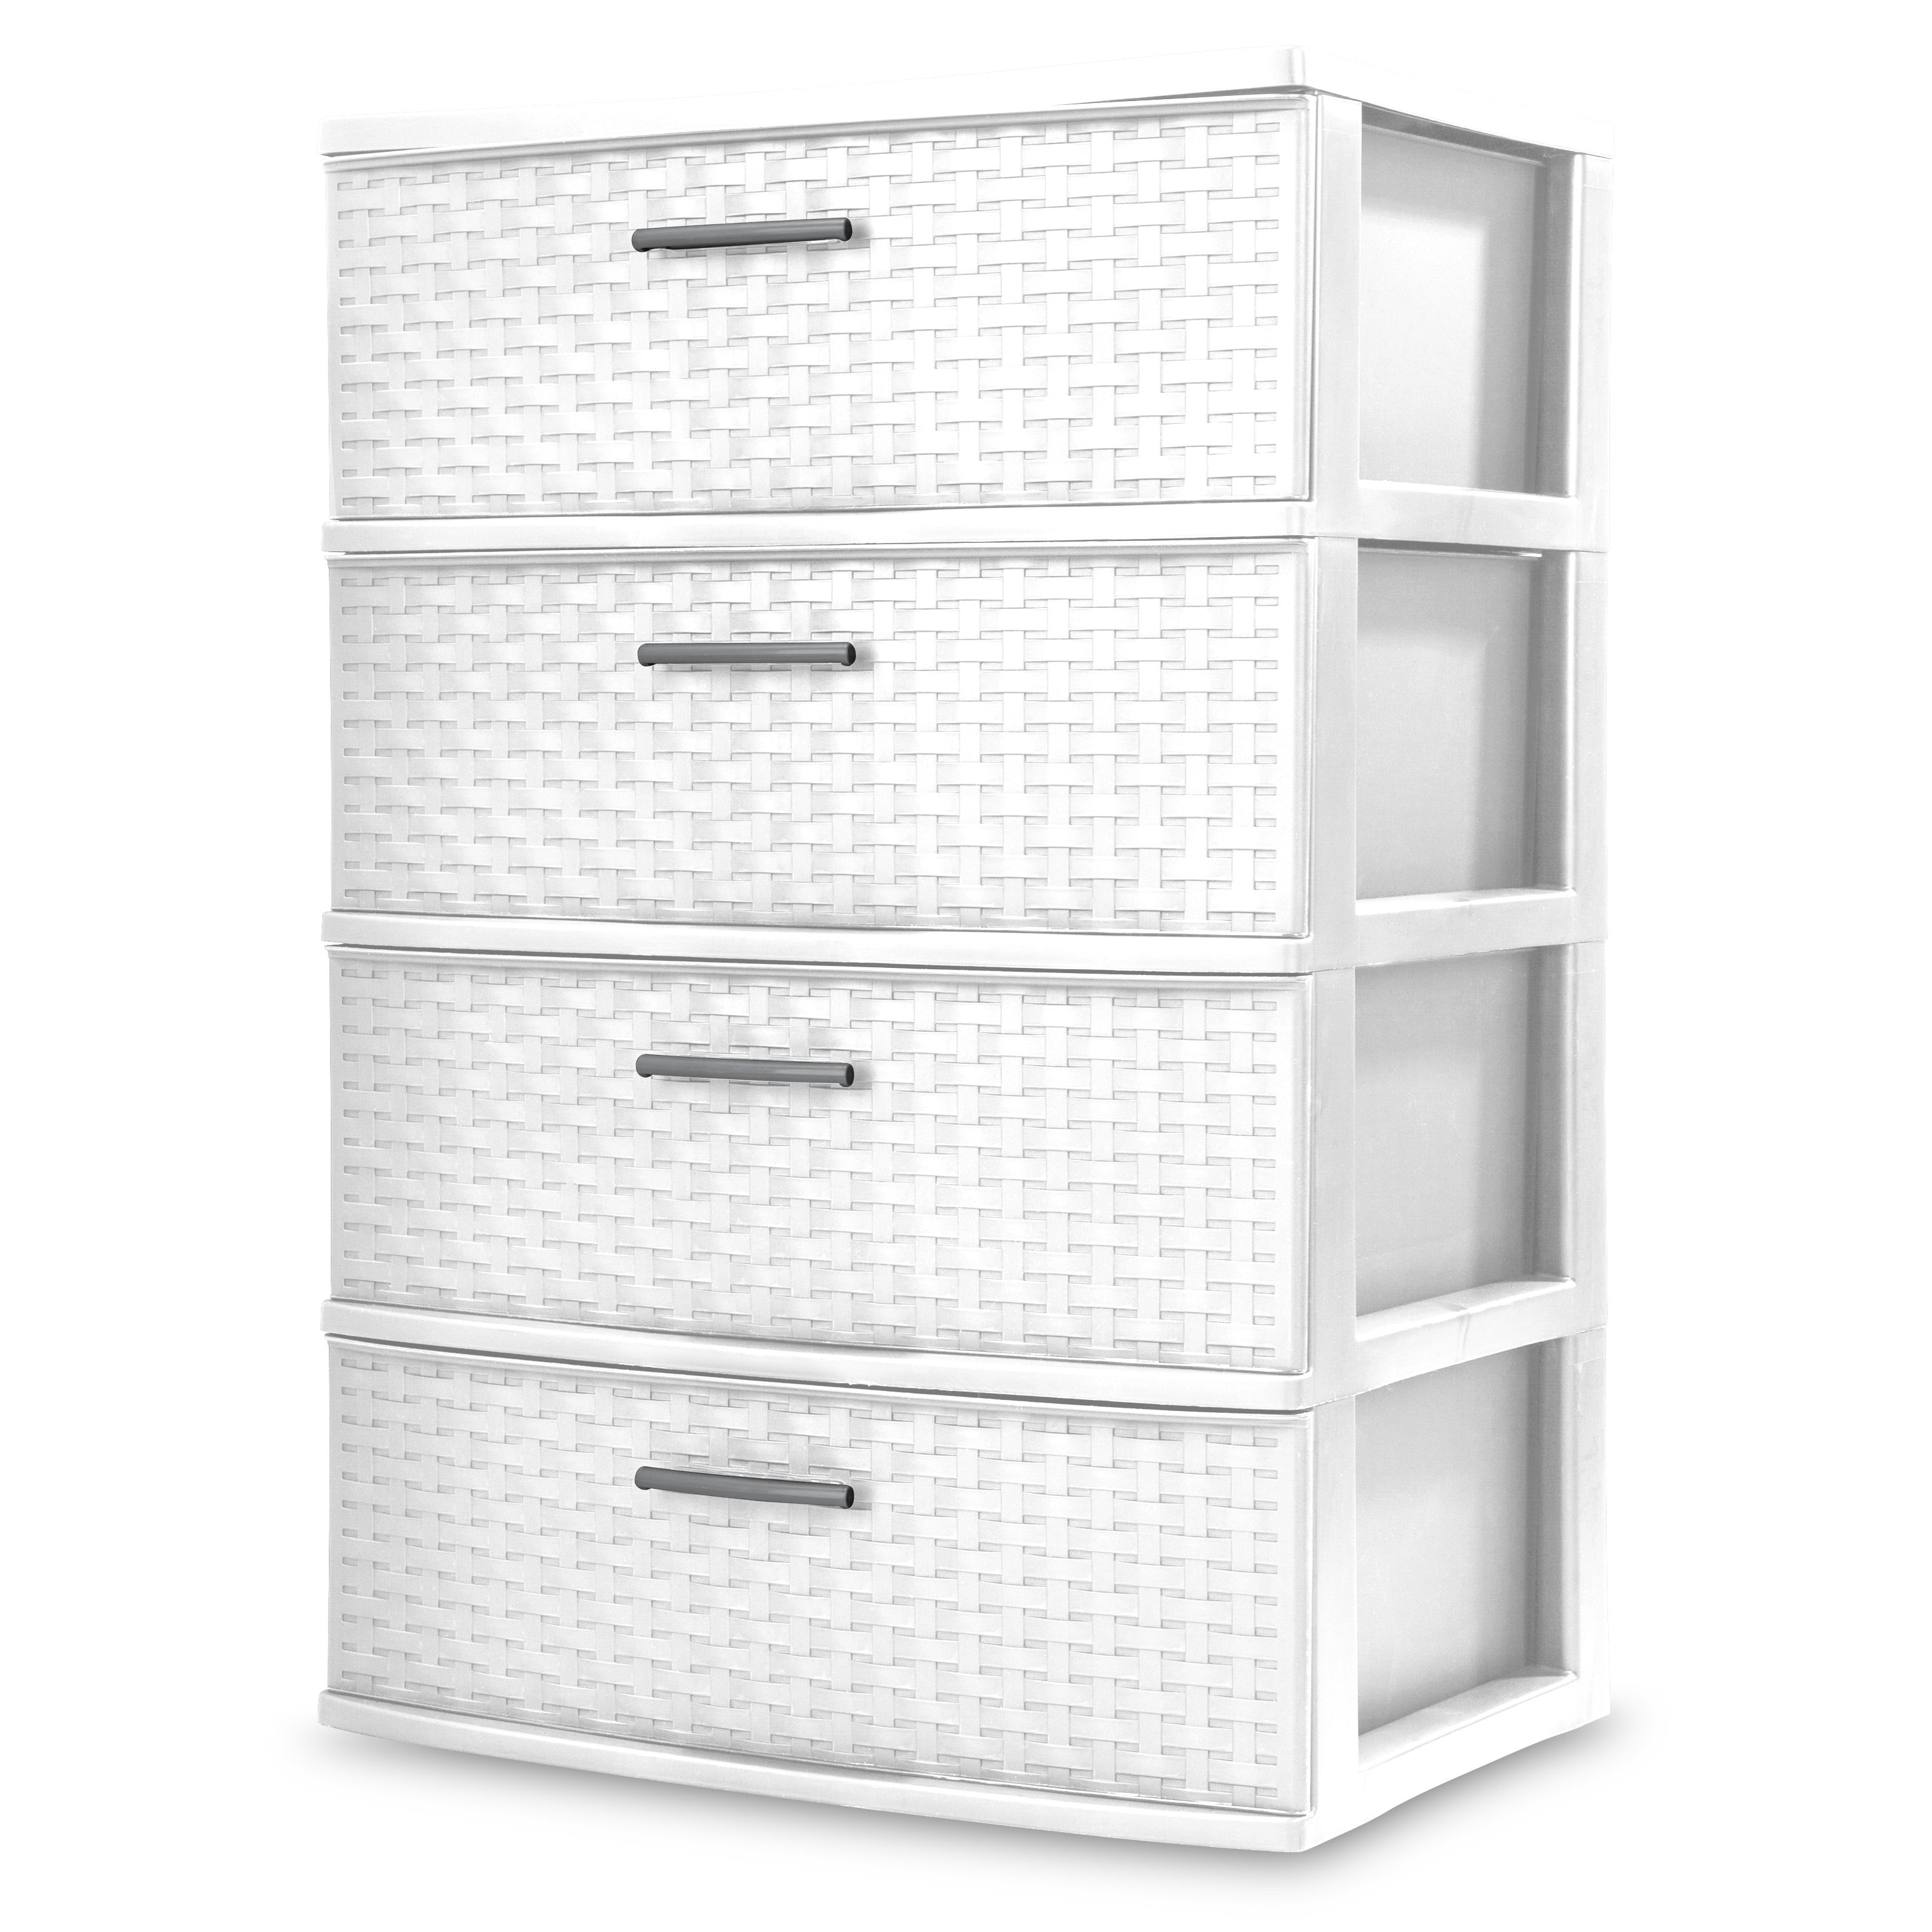 Rattan Drawers Plastic Tower Storage Drawer Cabinet Best for Office Home School 